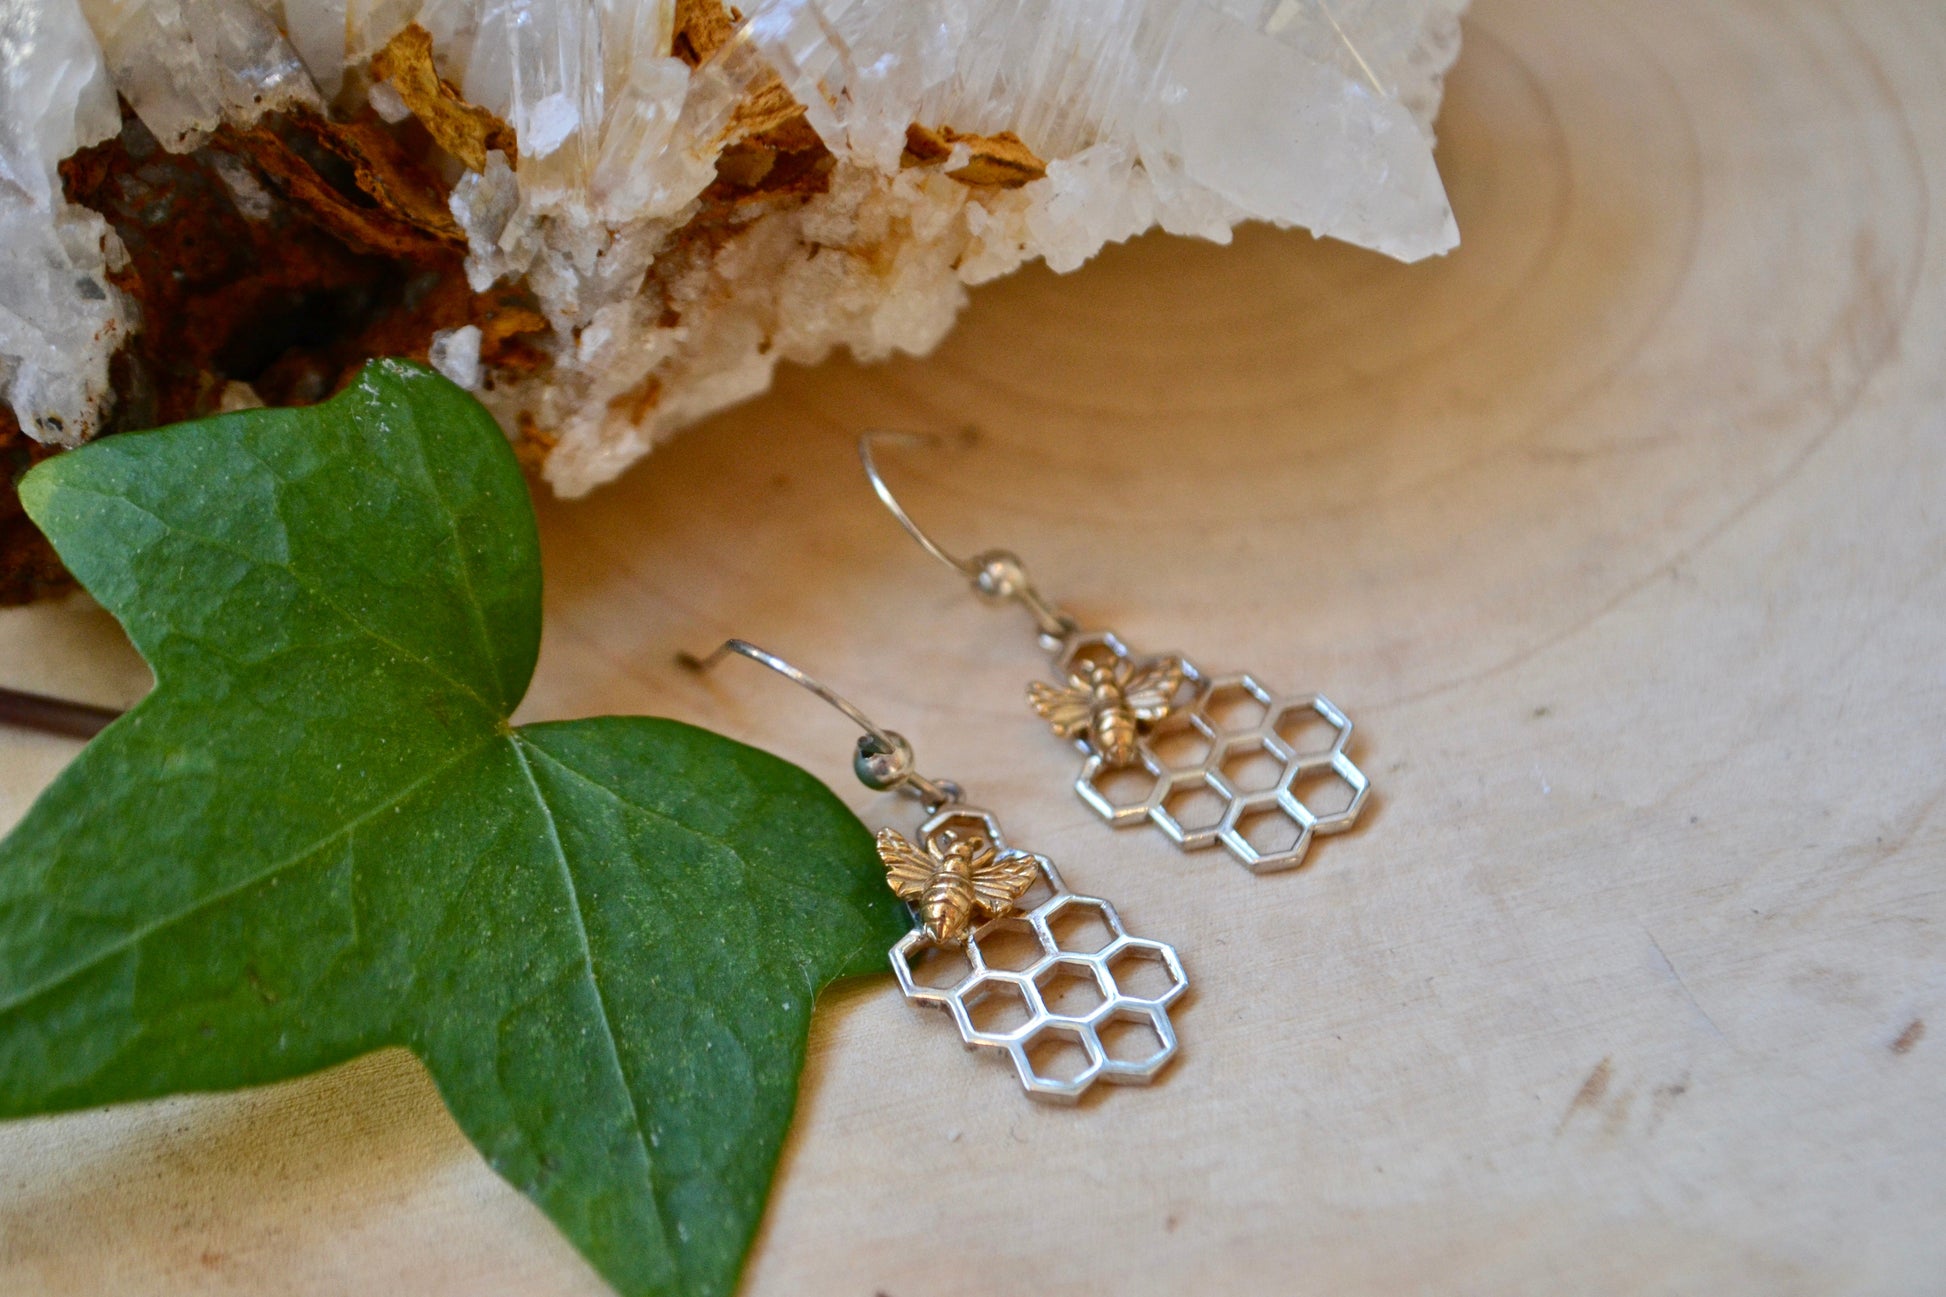 Bee and honey comb earrings